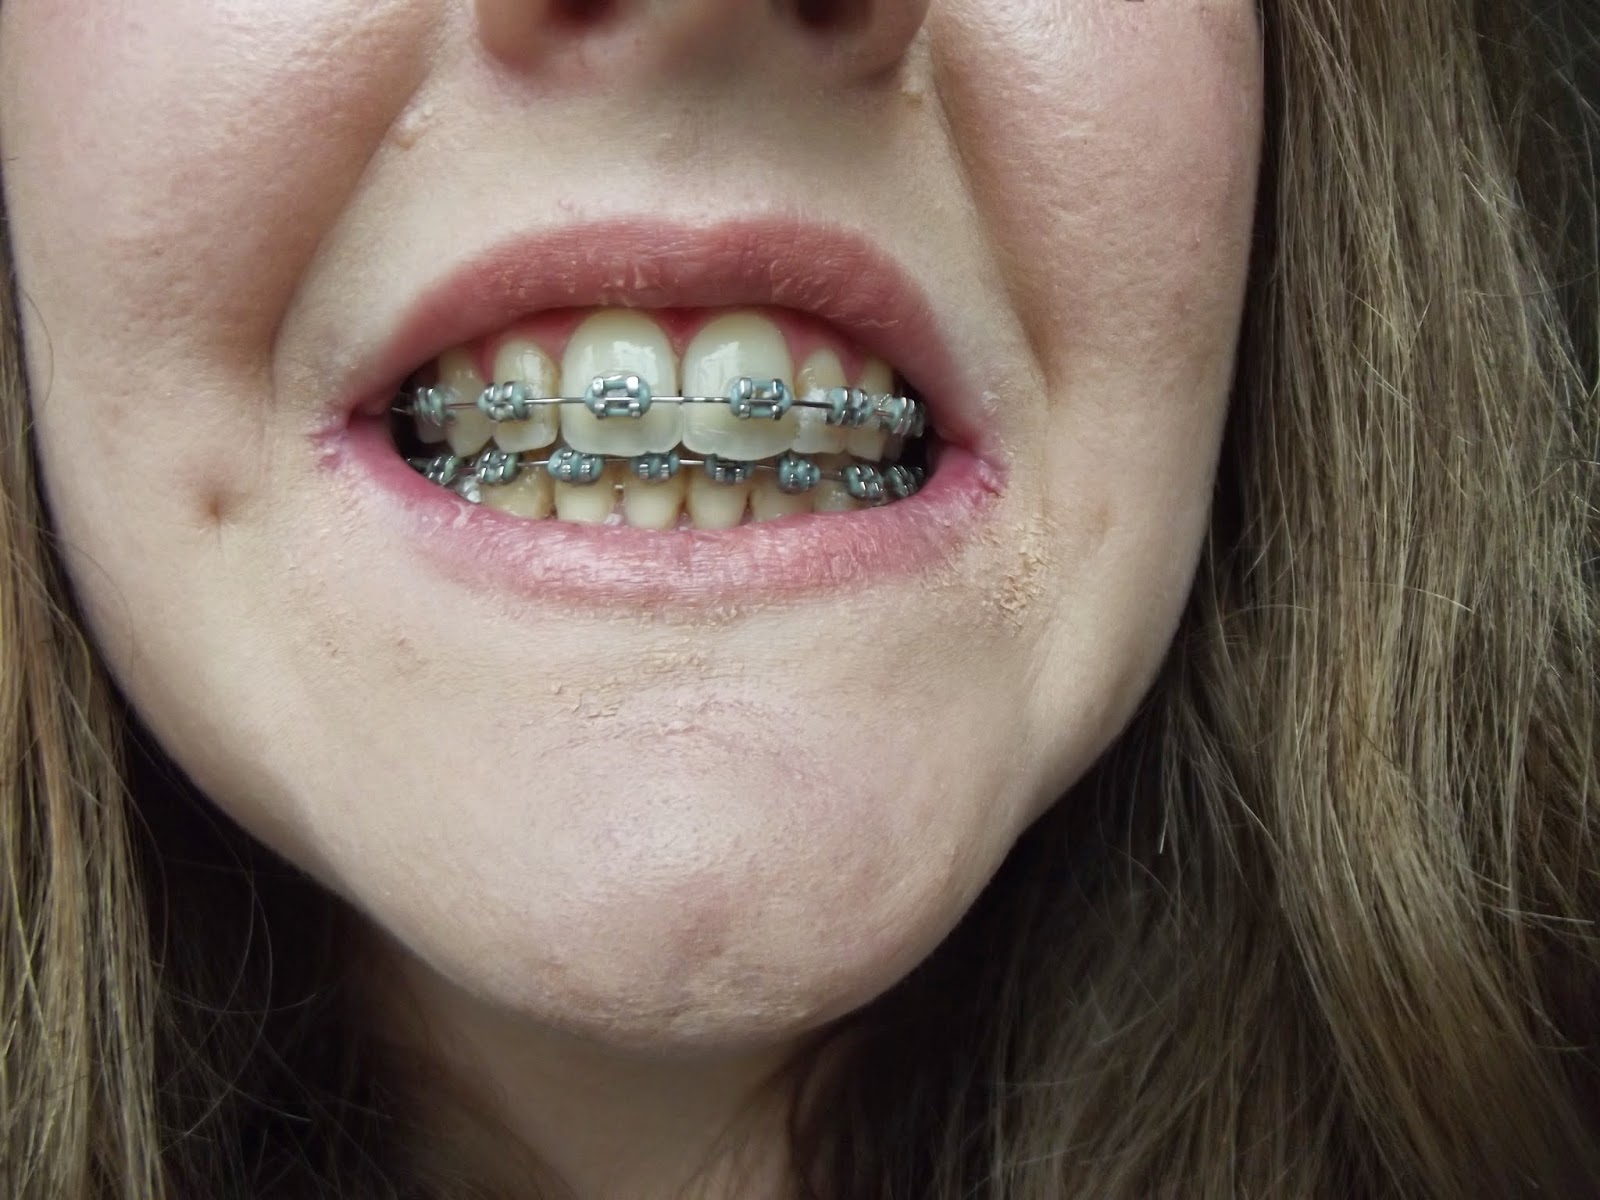 a photo of teeth with braces during orthodontic treatment